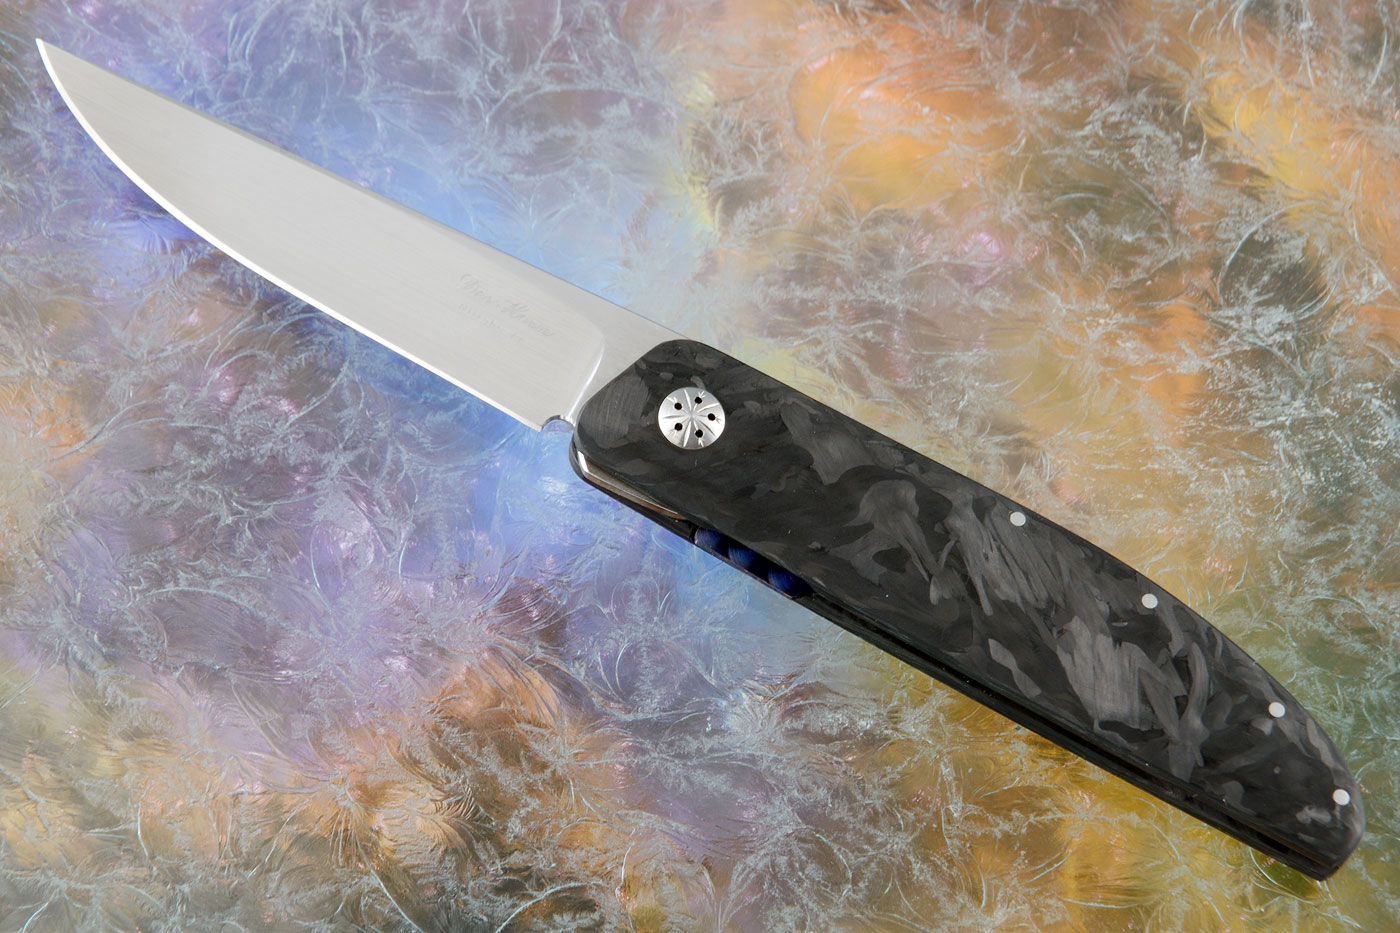 Model 450 Ultra-Light Front Flipper with Nitrobe 77 and Marbled Carbon Fiber